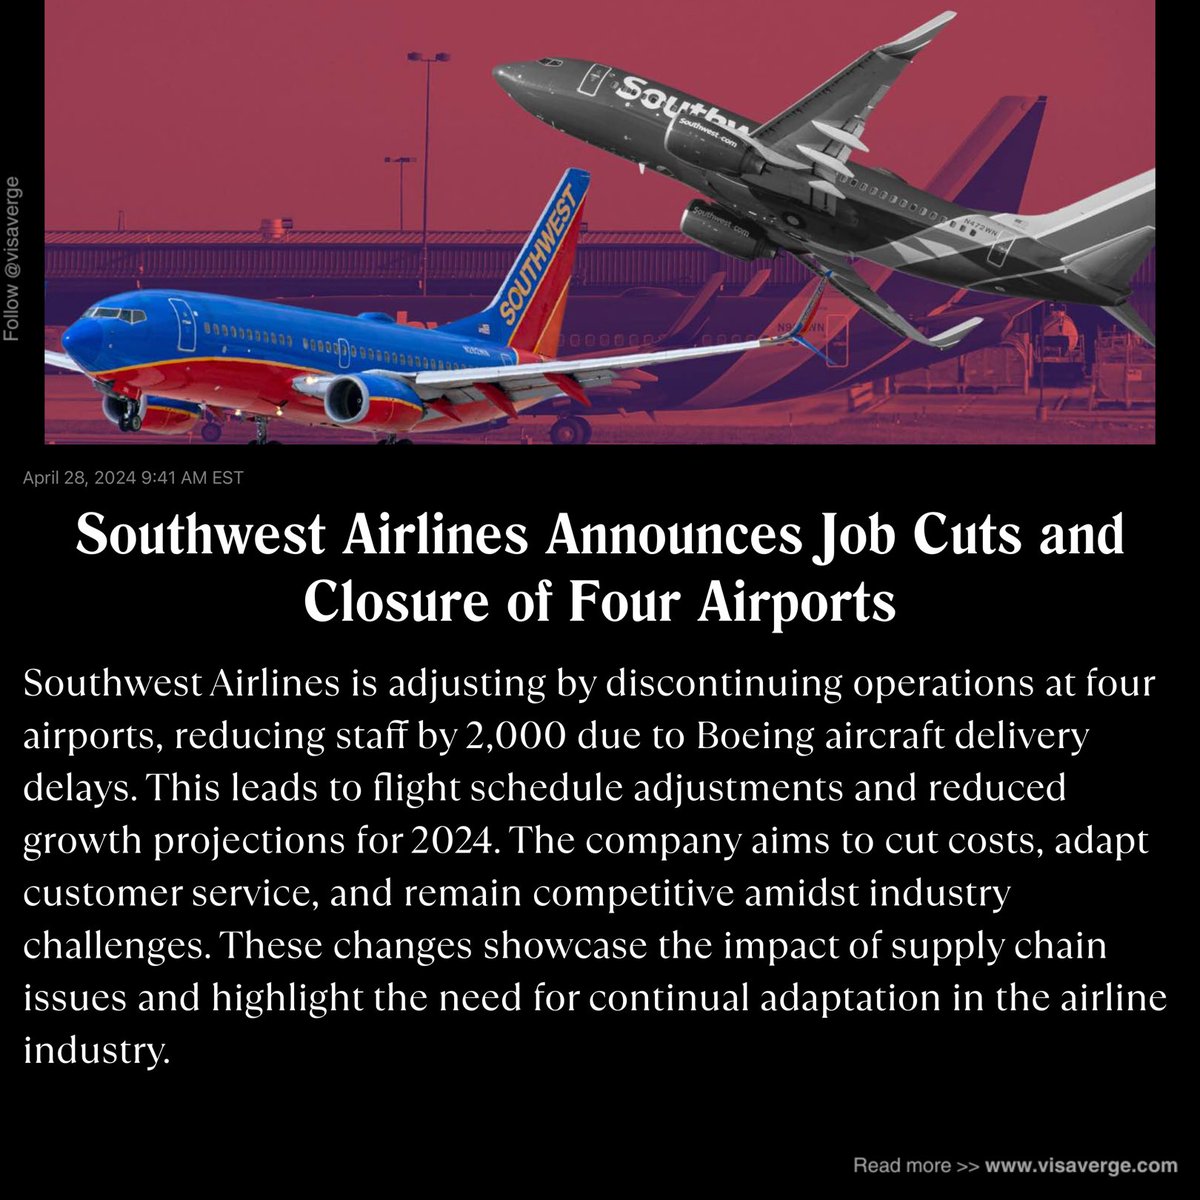 🌎 Breaking News 🌎 @visaverge

Attention travelers! Southwest Airlines has announced the closure of operations at 4 airports, including one in New York, leading to a reduction of 2,000 jobs. 🛫 Stay informed #SouthwestAirlines #TravelNews #JobCuts 🚫